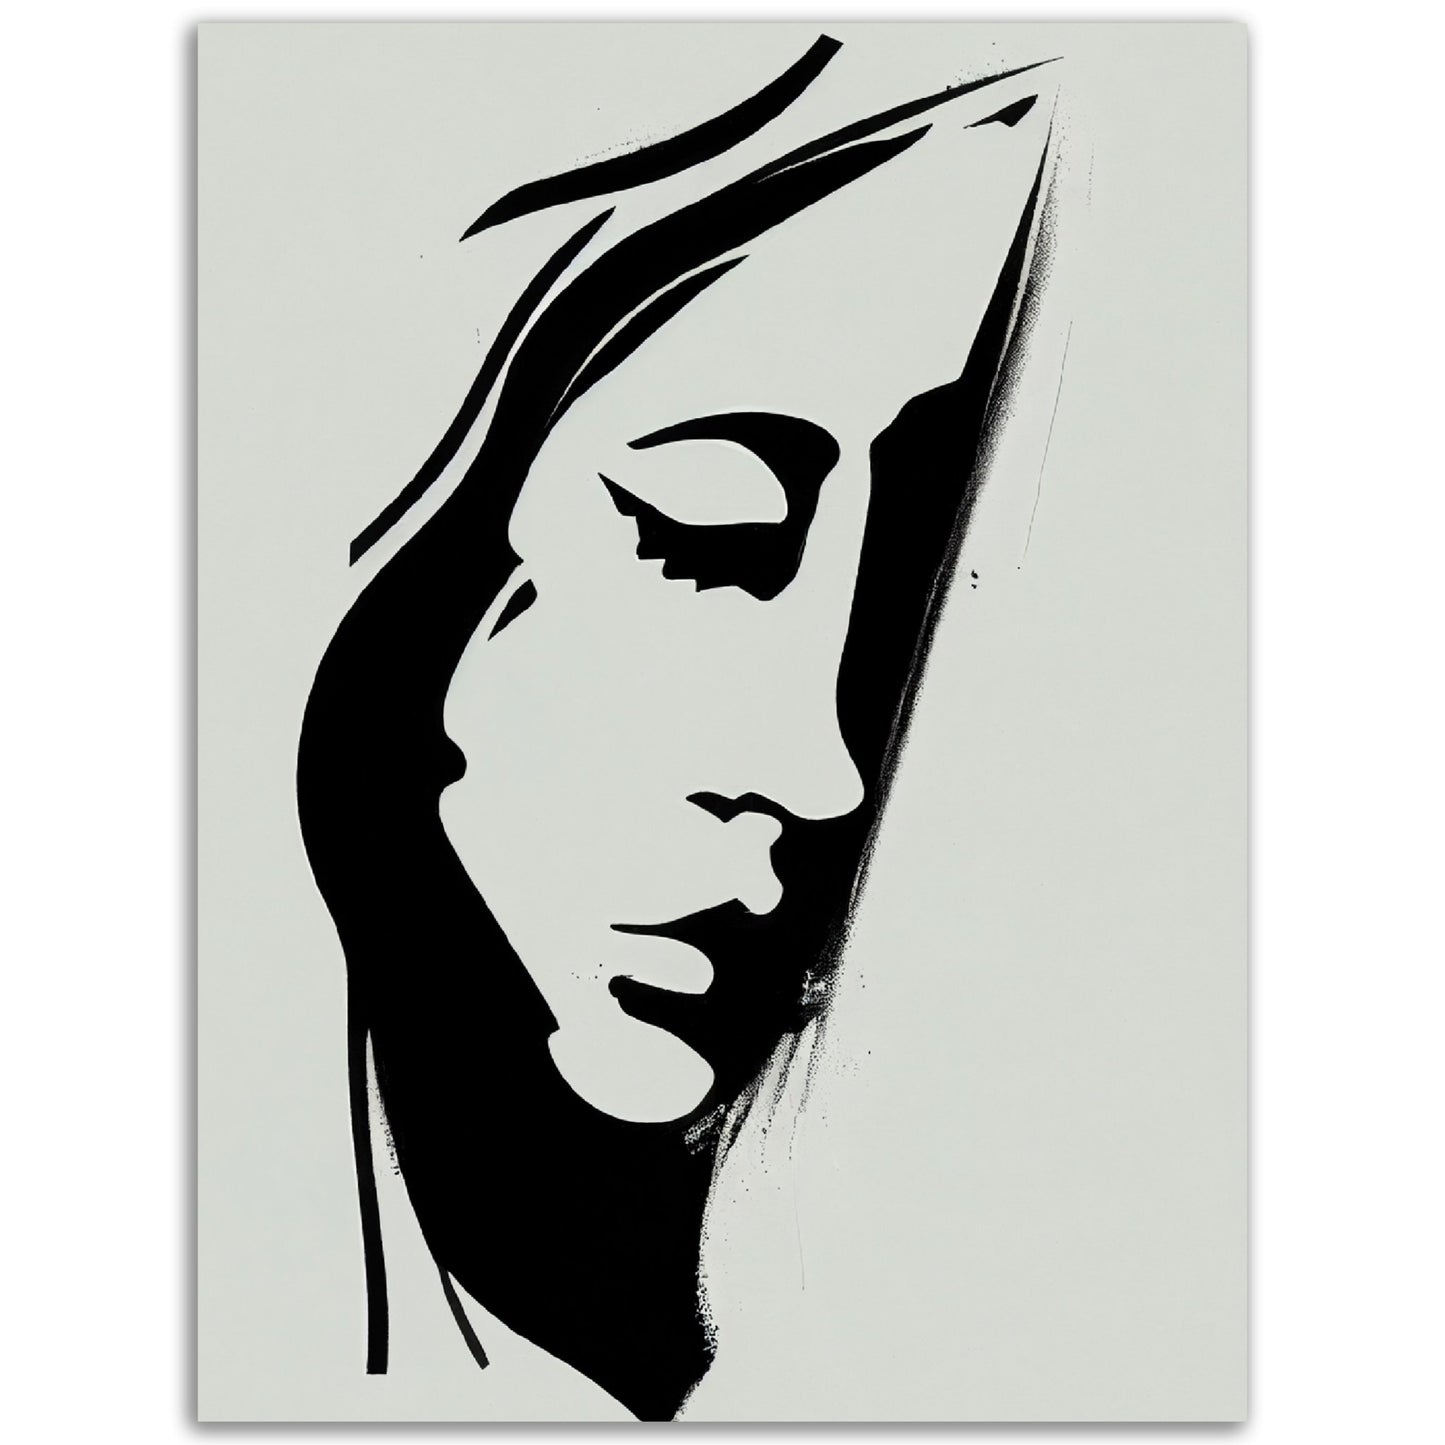 A black and white drawing of Pondering Girl, perfect for decorating your room with high quality poster wall art.